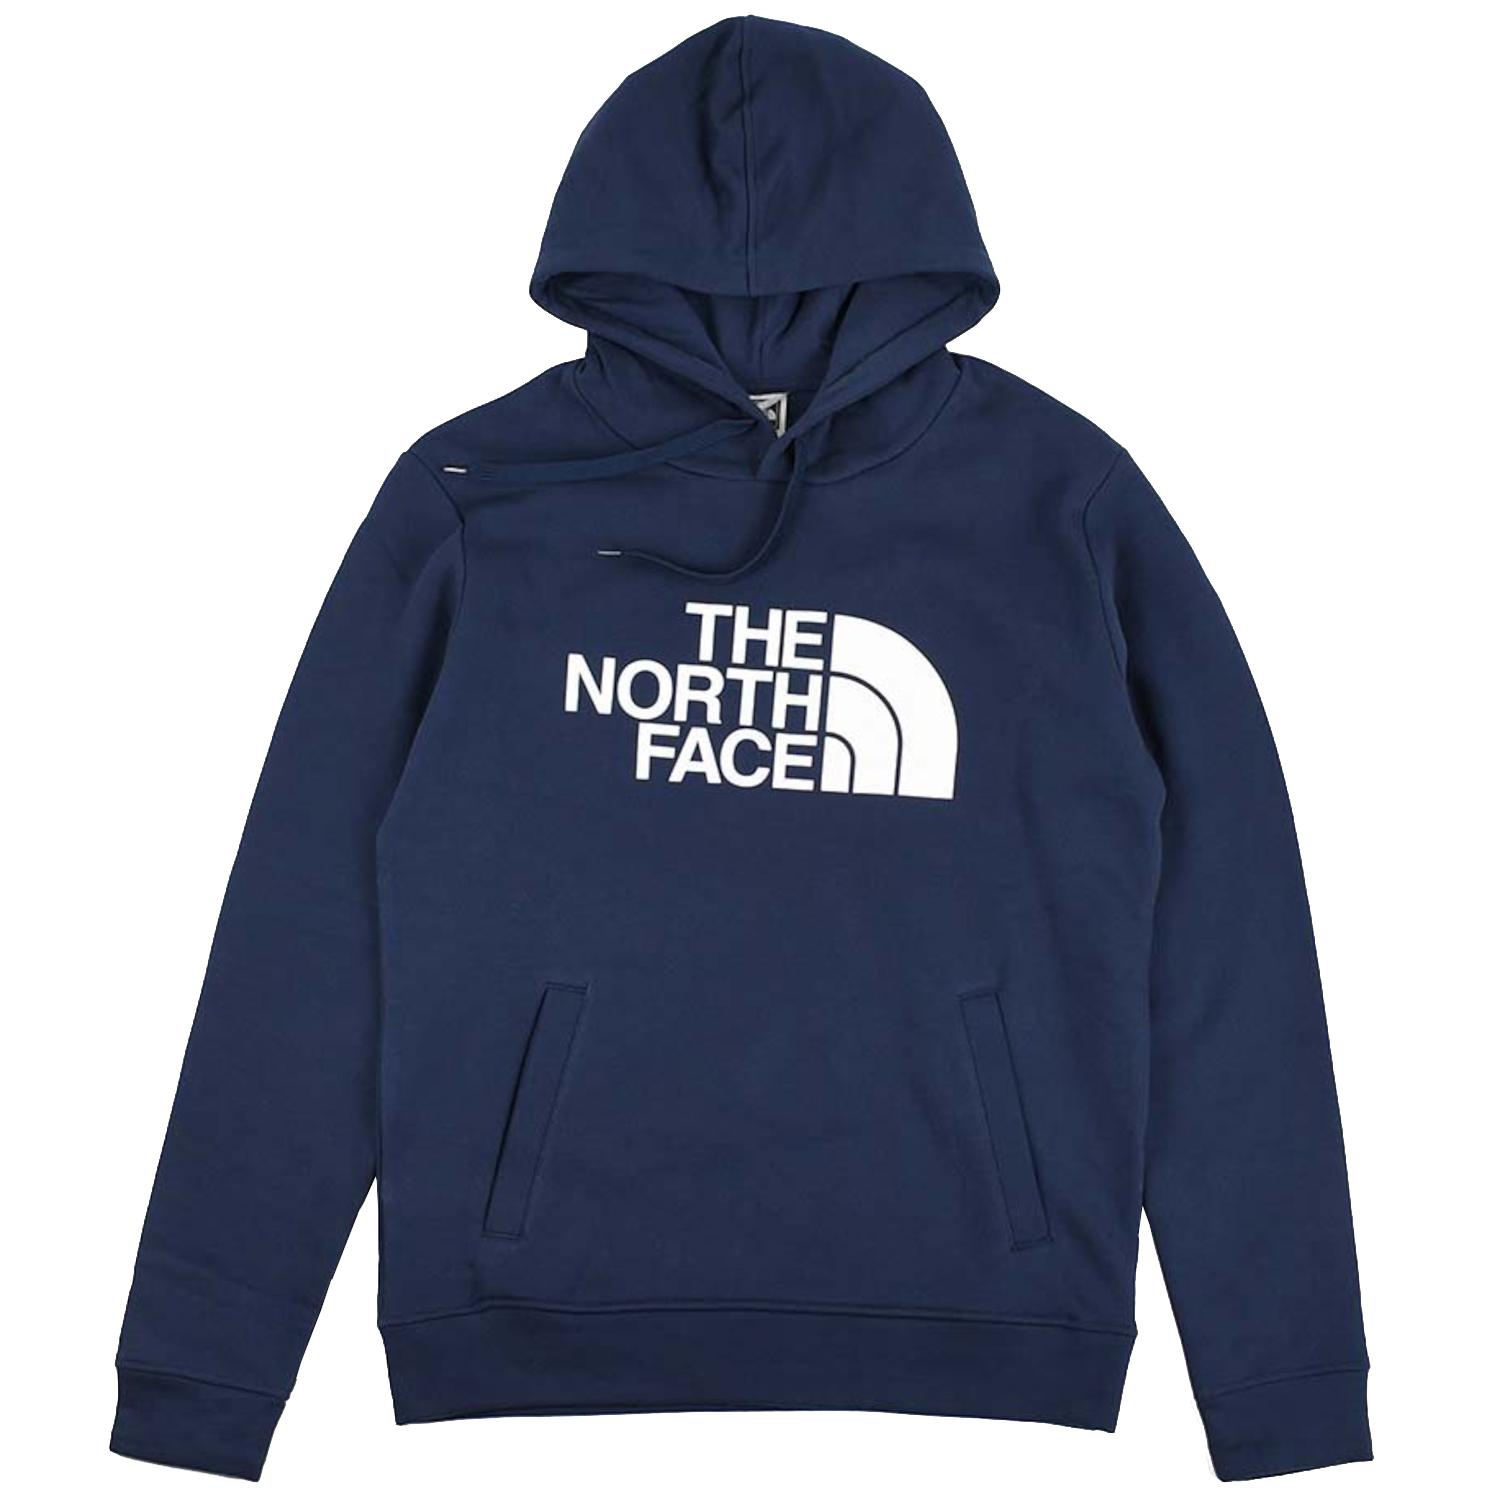 The North Face Dome Pullover Hoodie, Mens navy Sweatshirt